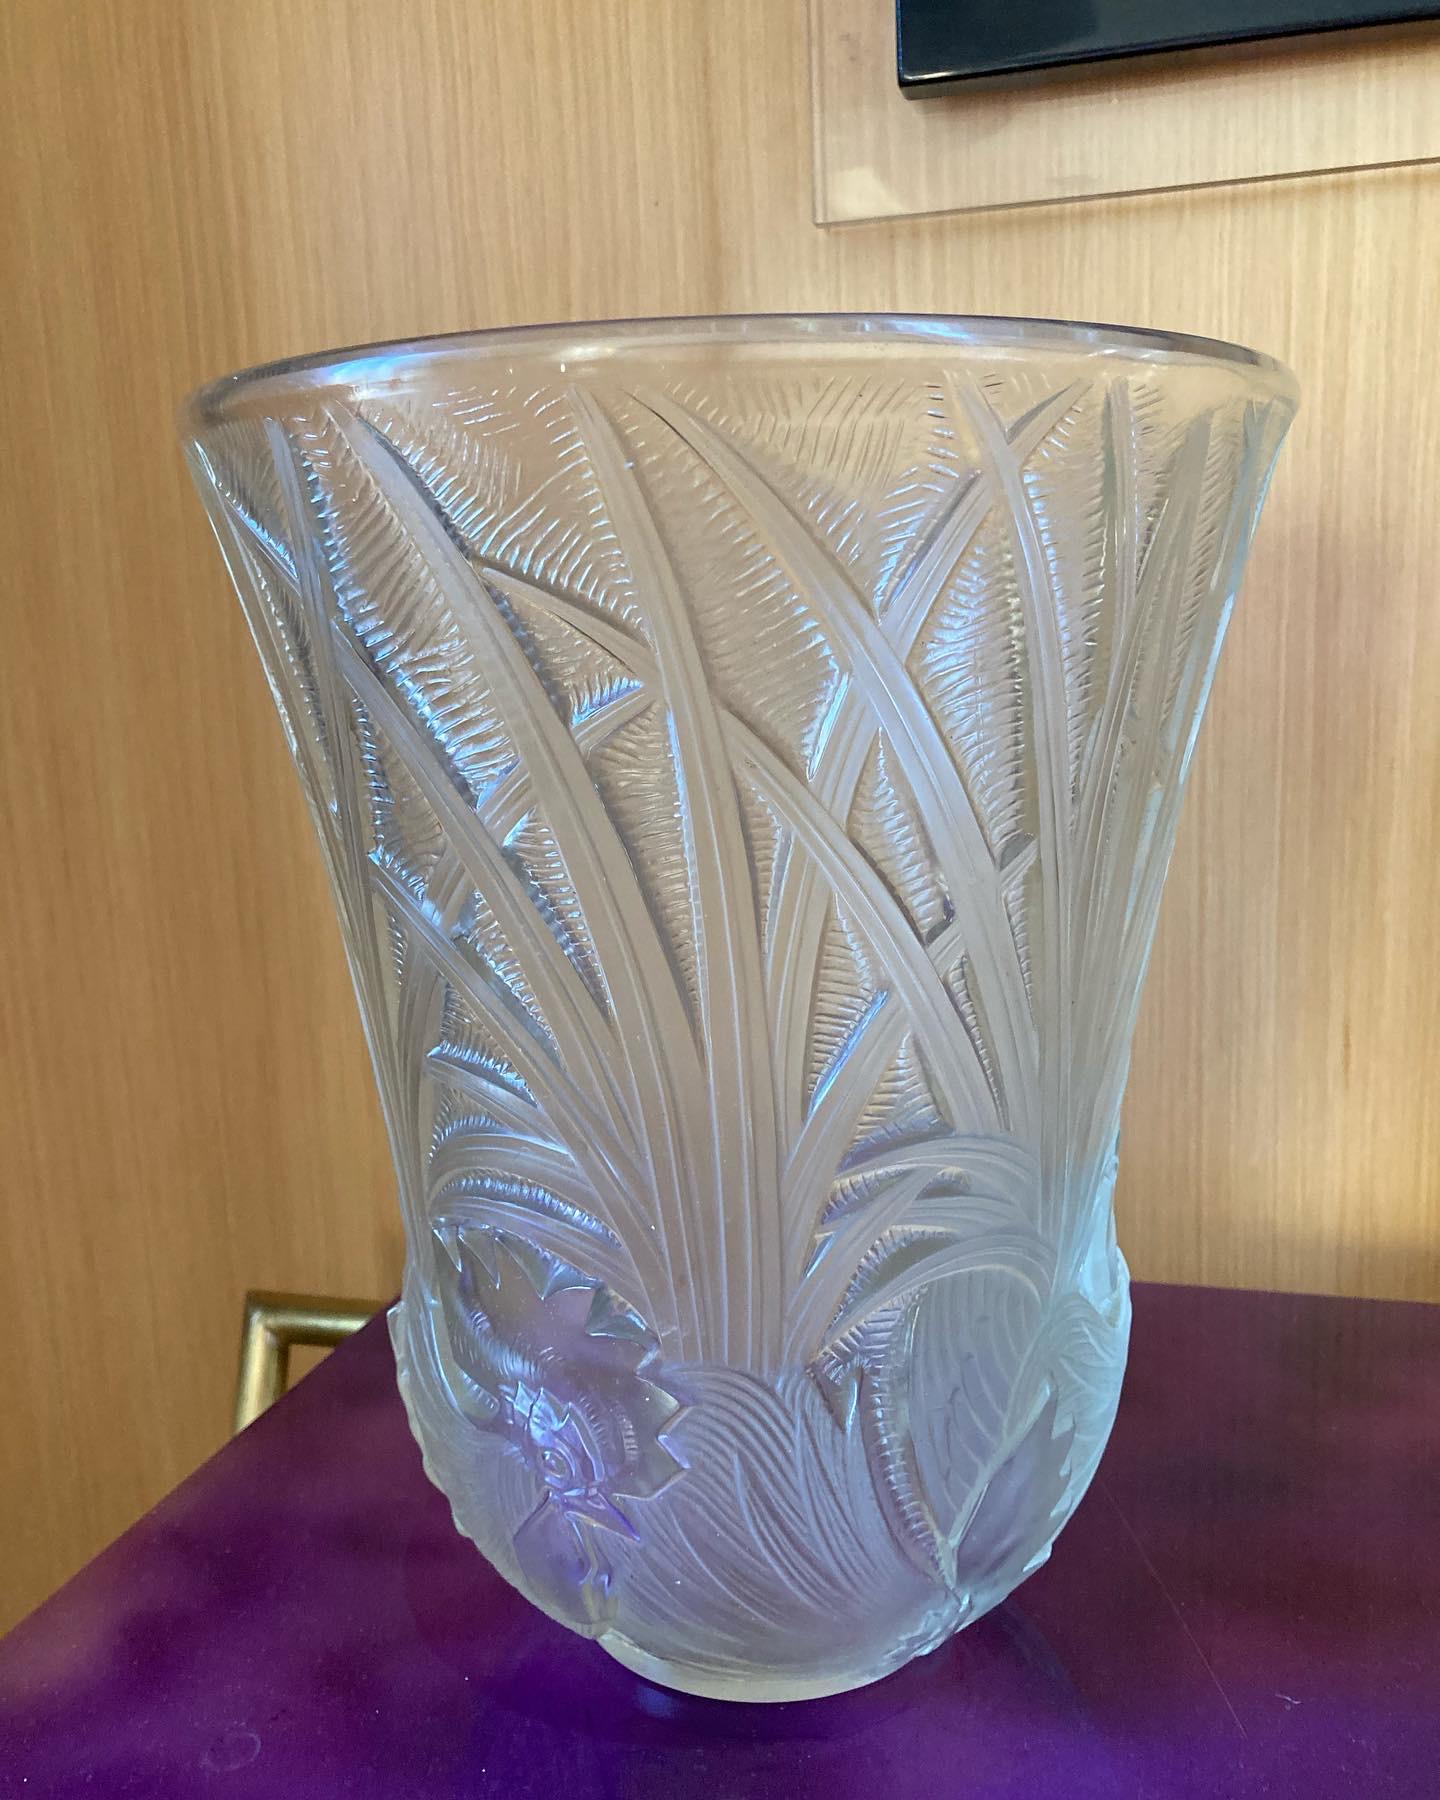 Rare 1930's Vase Signed by Verlys who is a Parisian firm competitors of Lalique or Sabino
Possibility of a second one to make a pair.